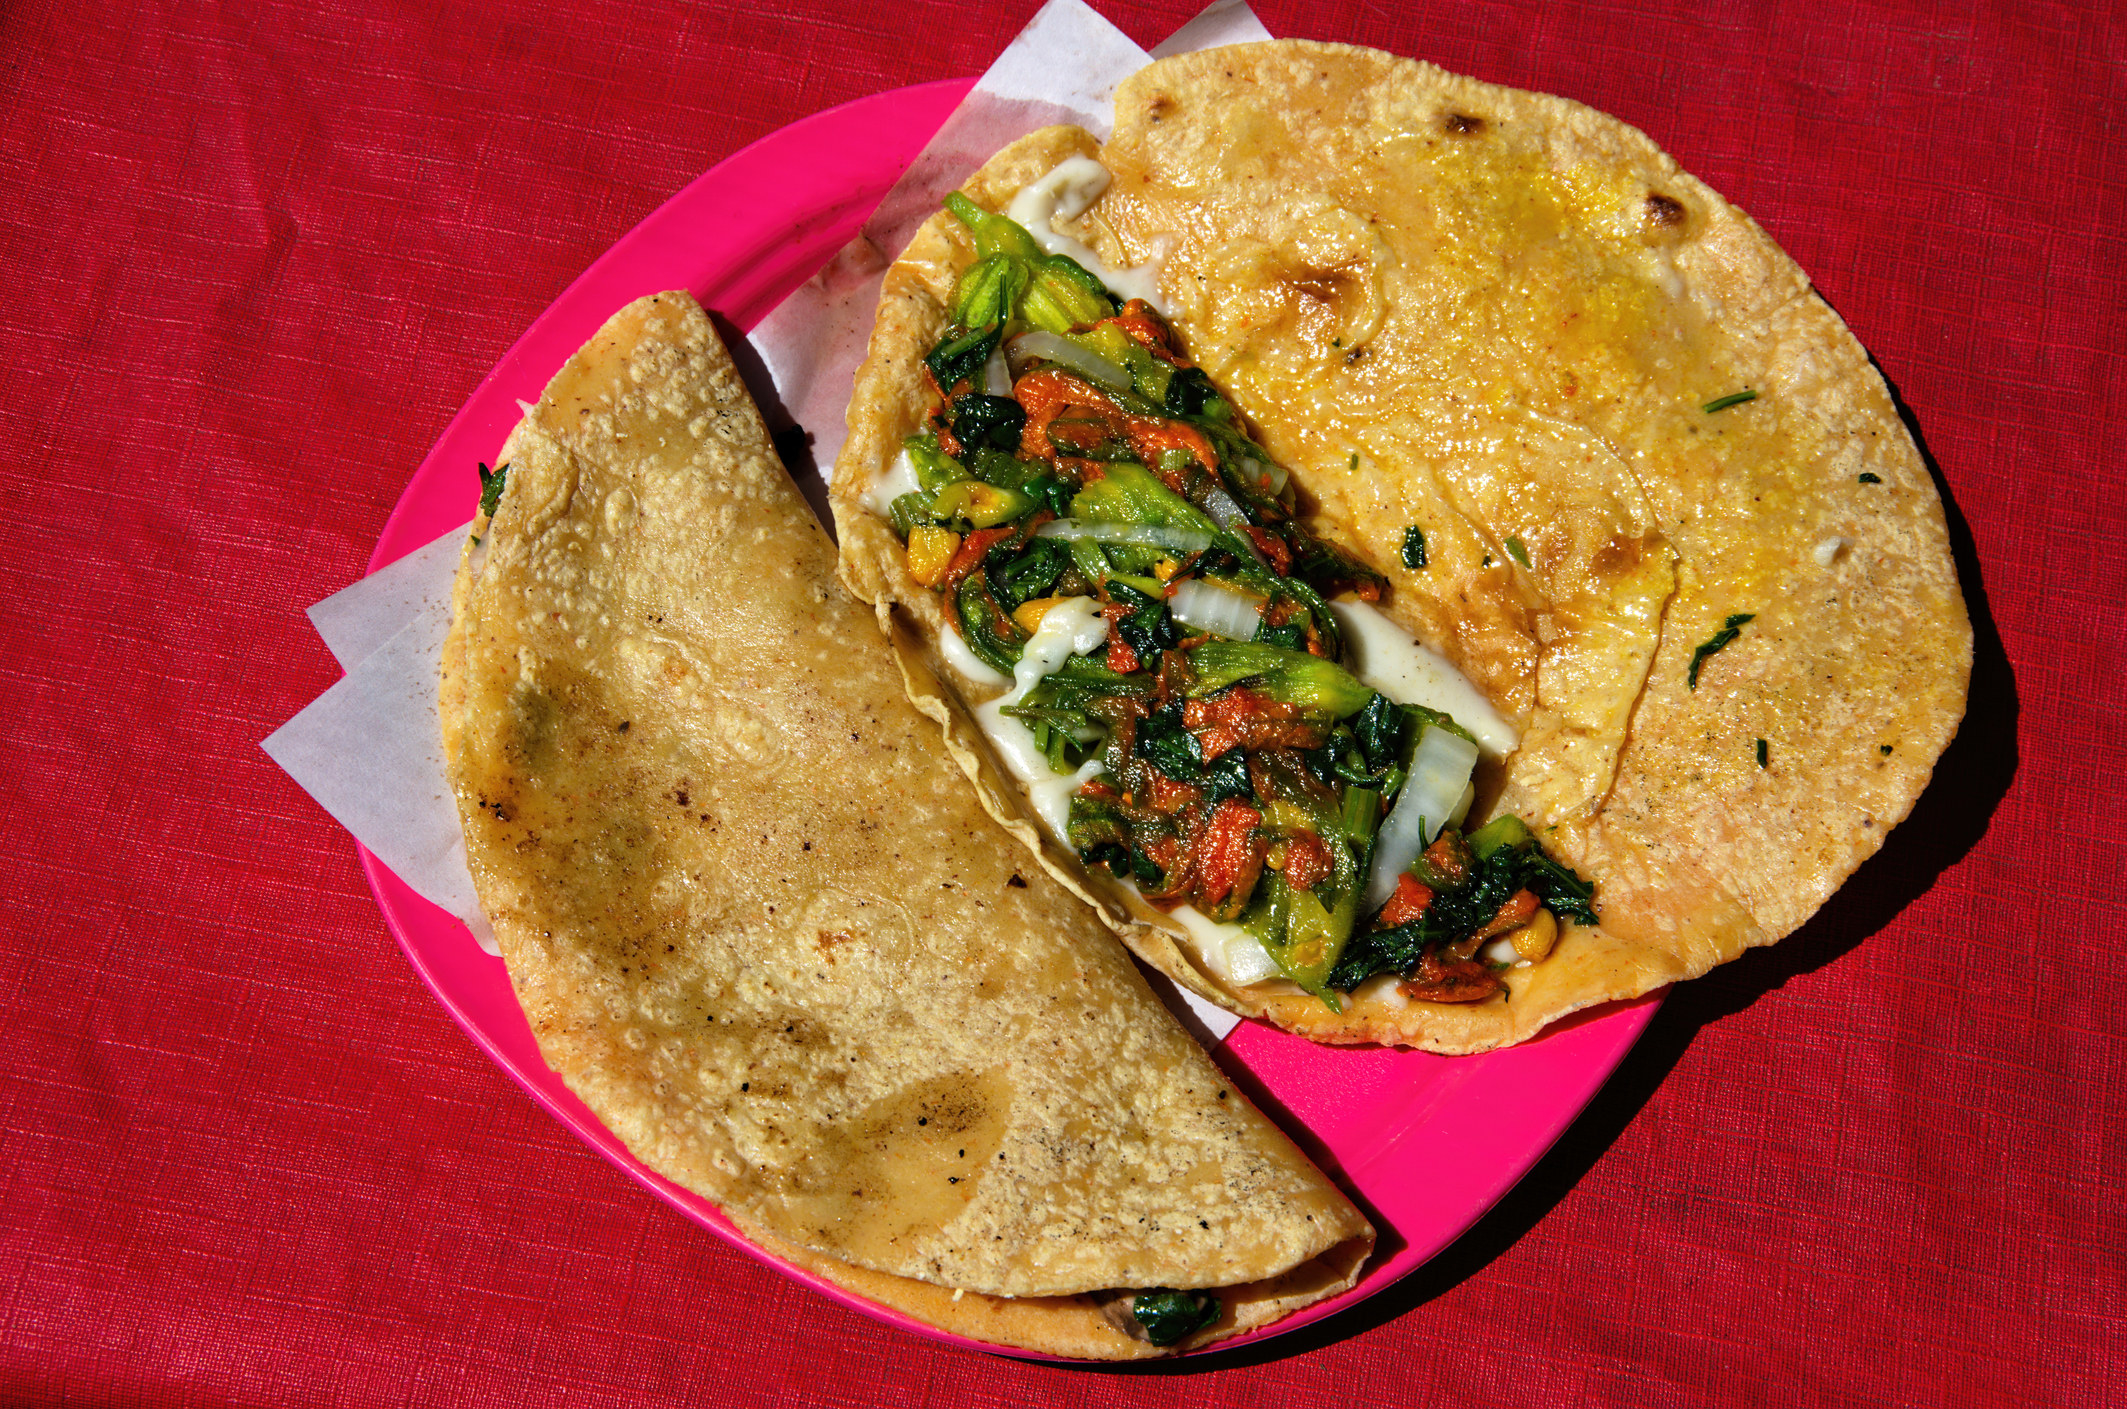 An authentic quesadilla on a red plate